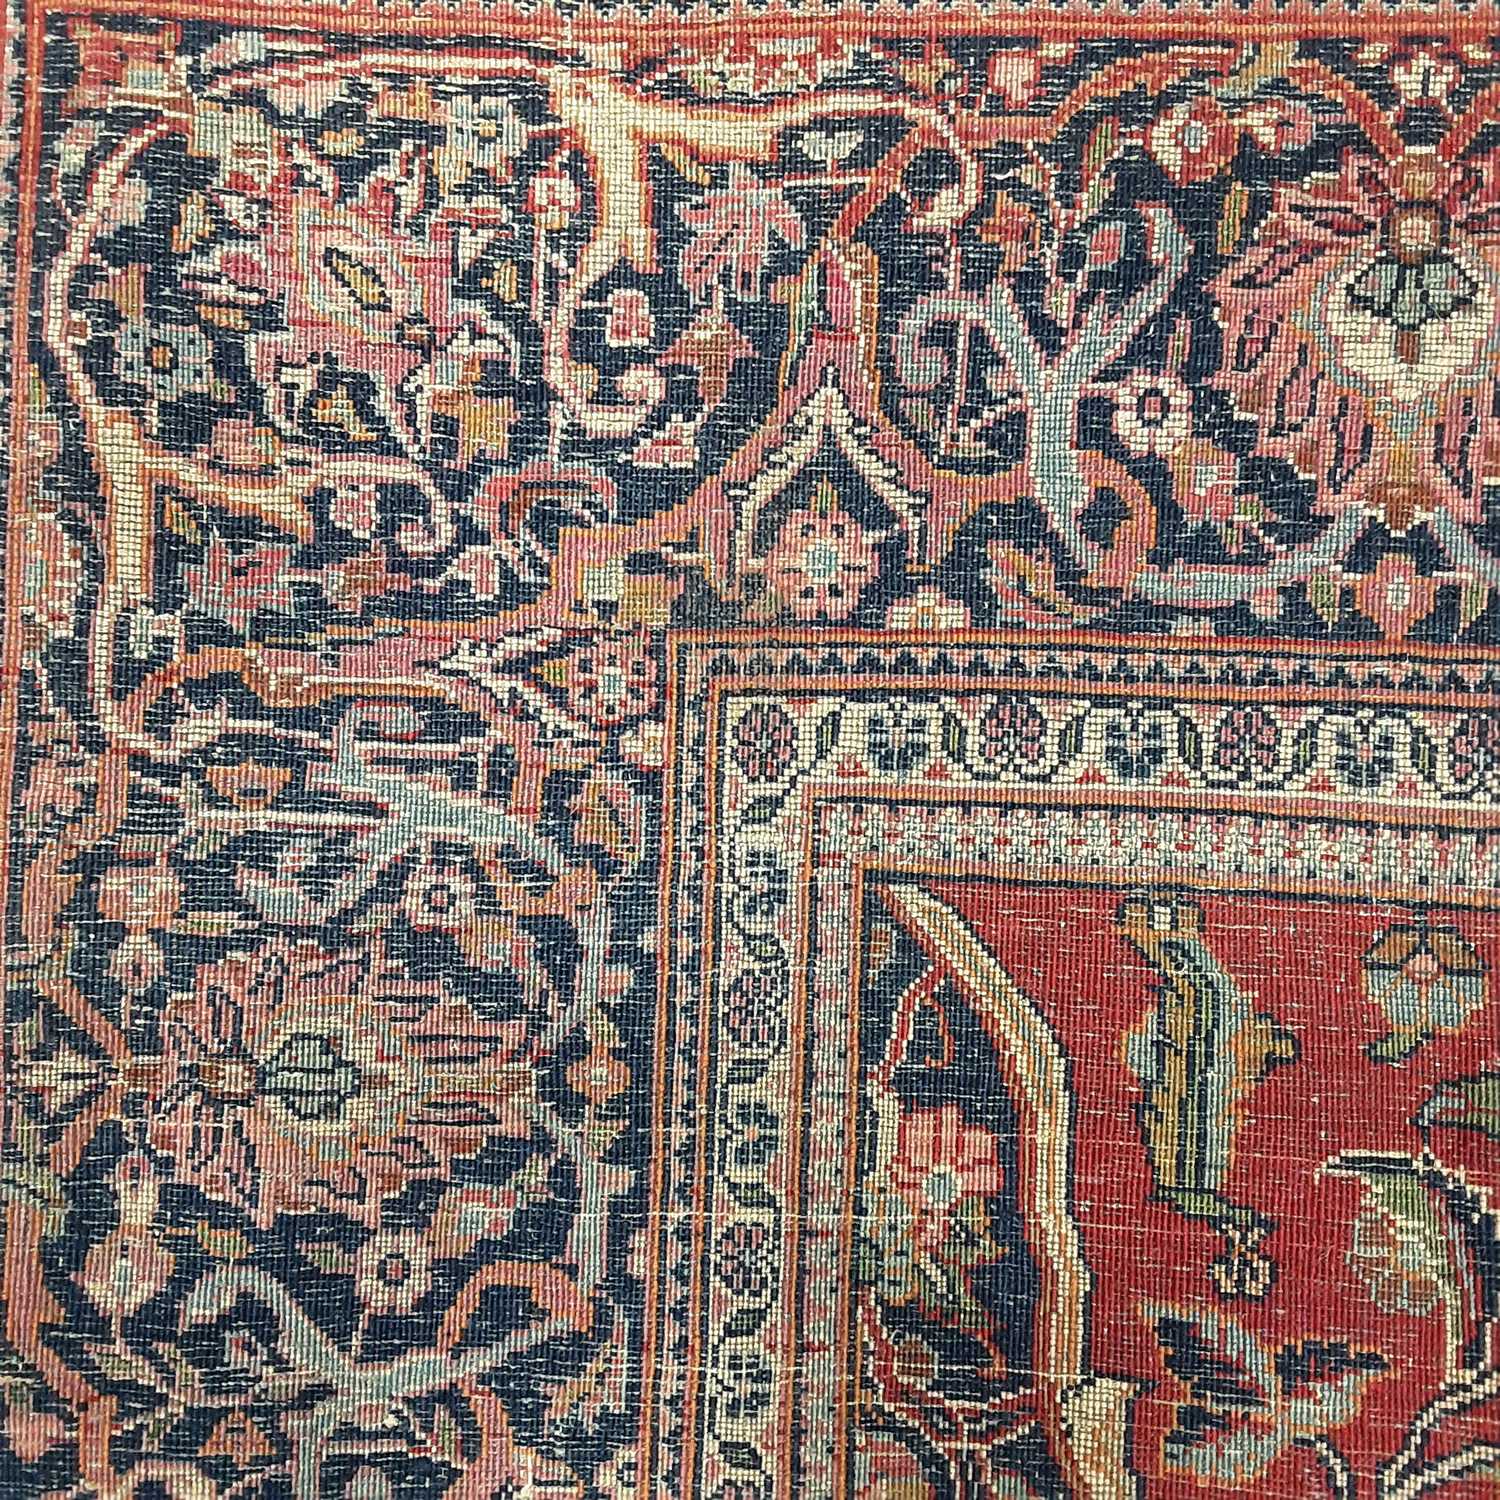 KASHAN PART SILK RUG LATE 19TH/EARLY 20TH CENTURY - Image 4 of 4